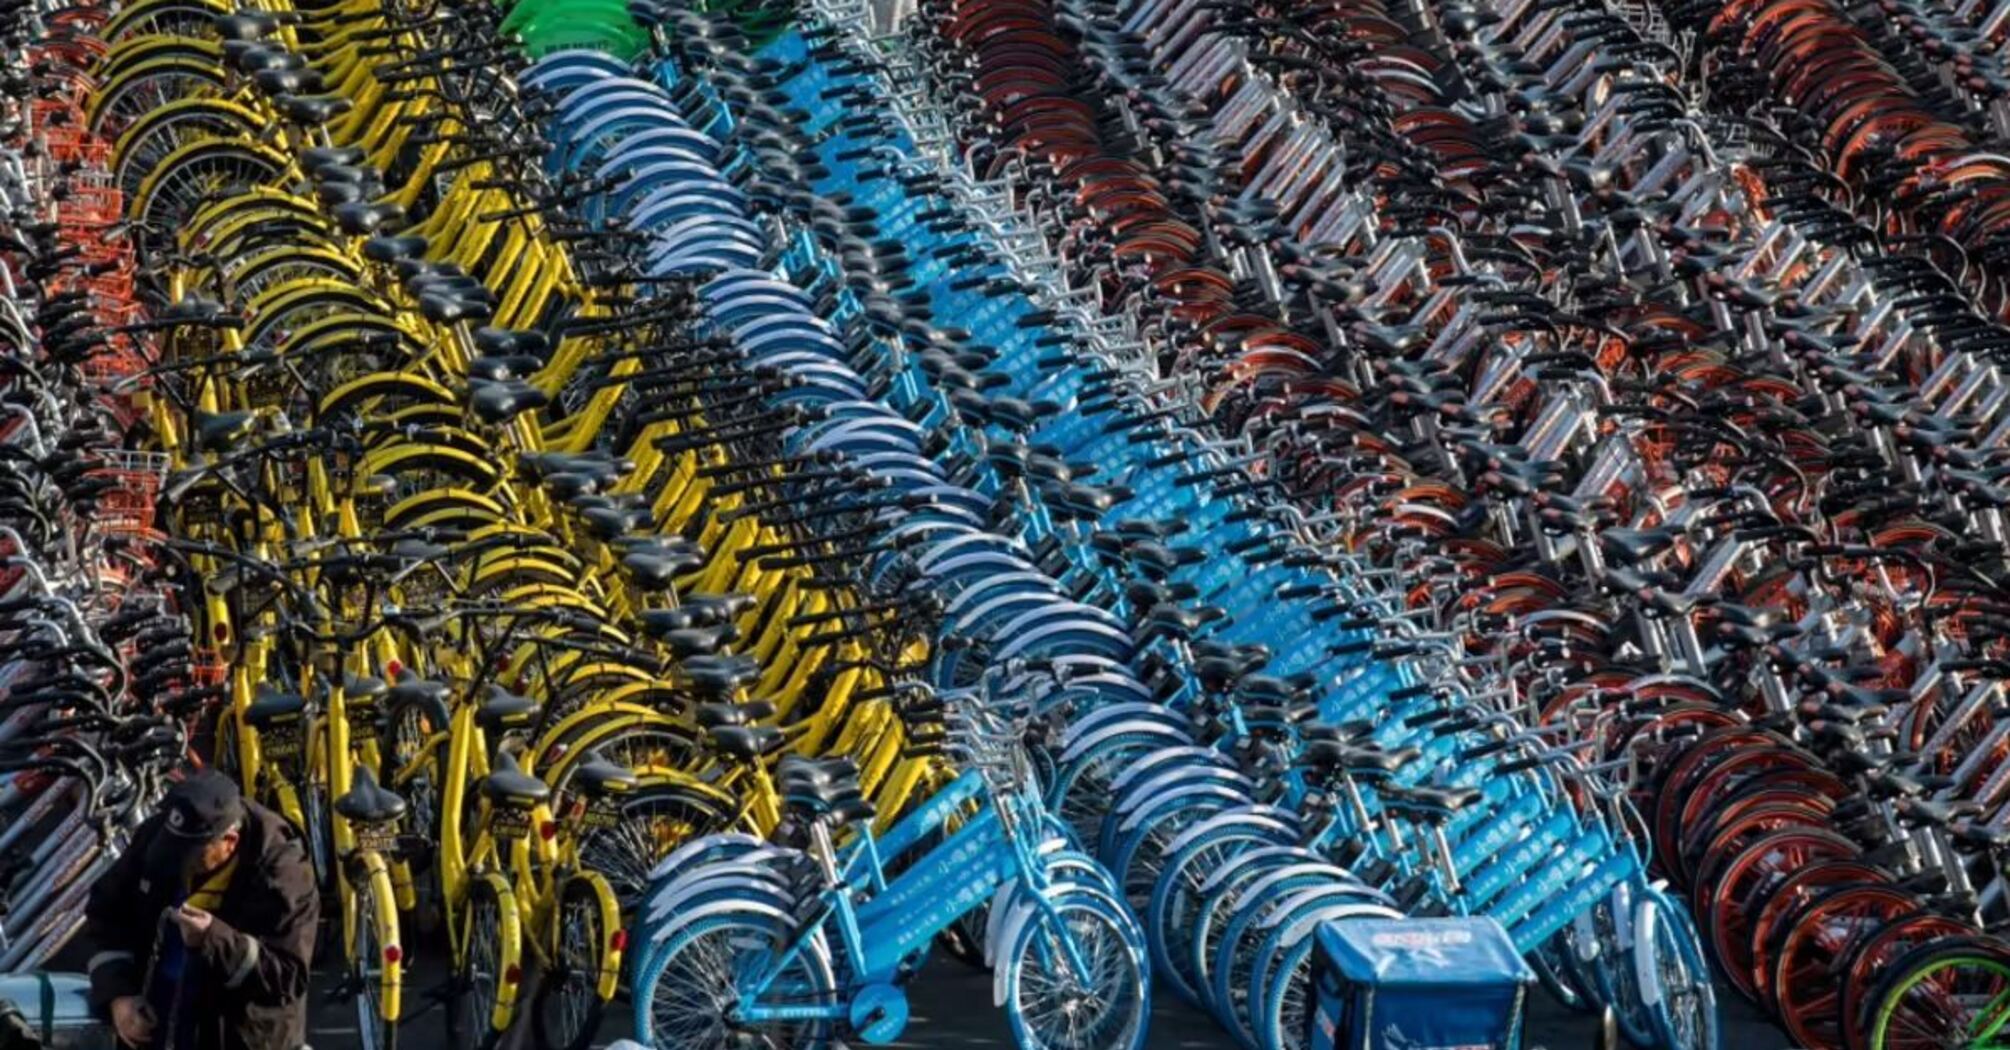 How bike cemeteries appear in China